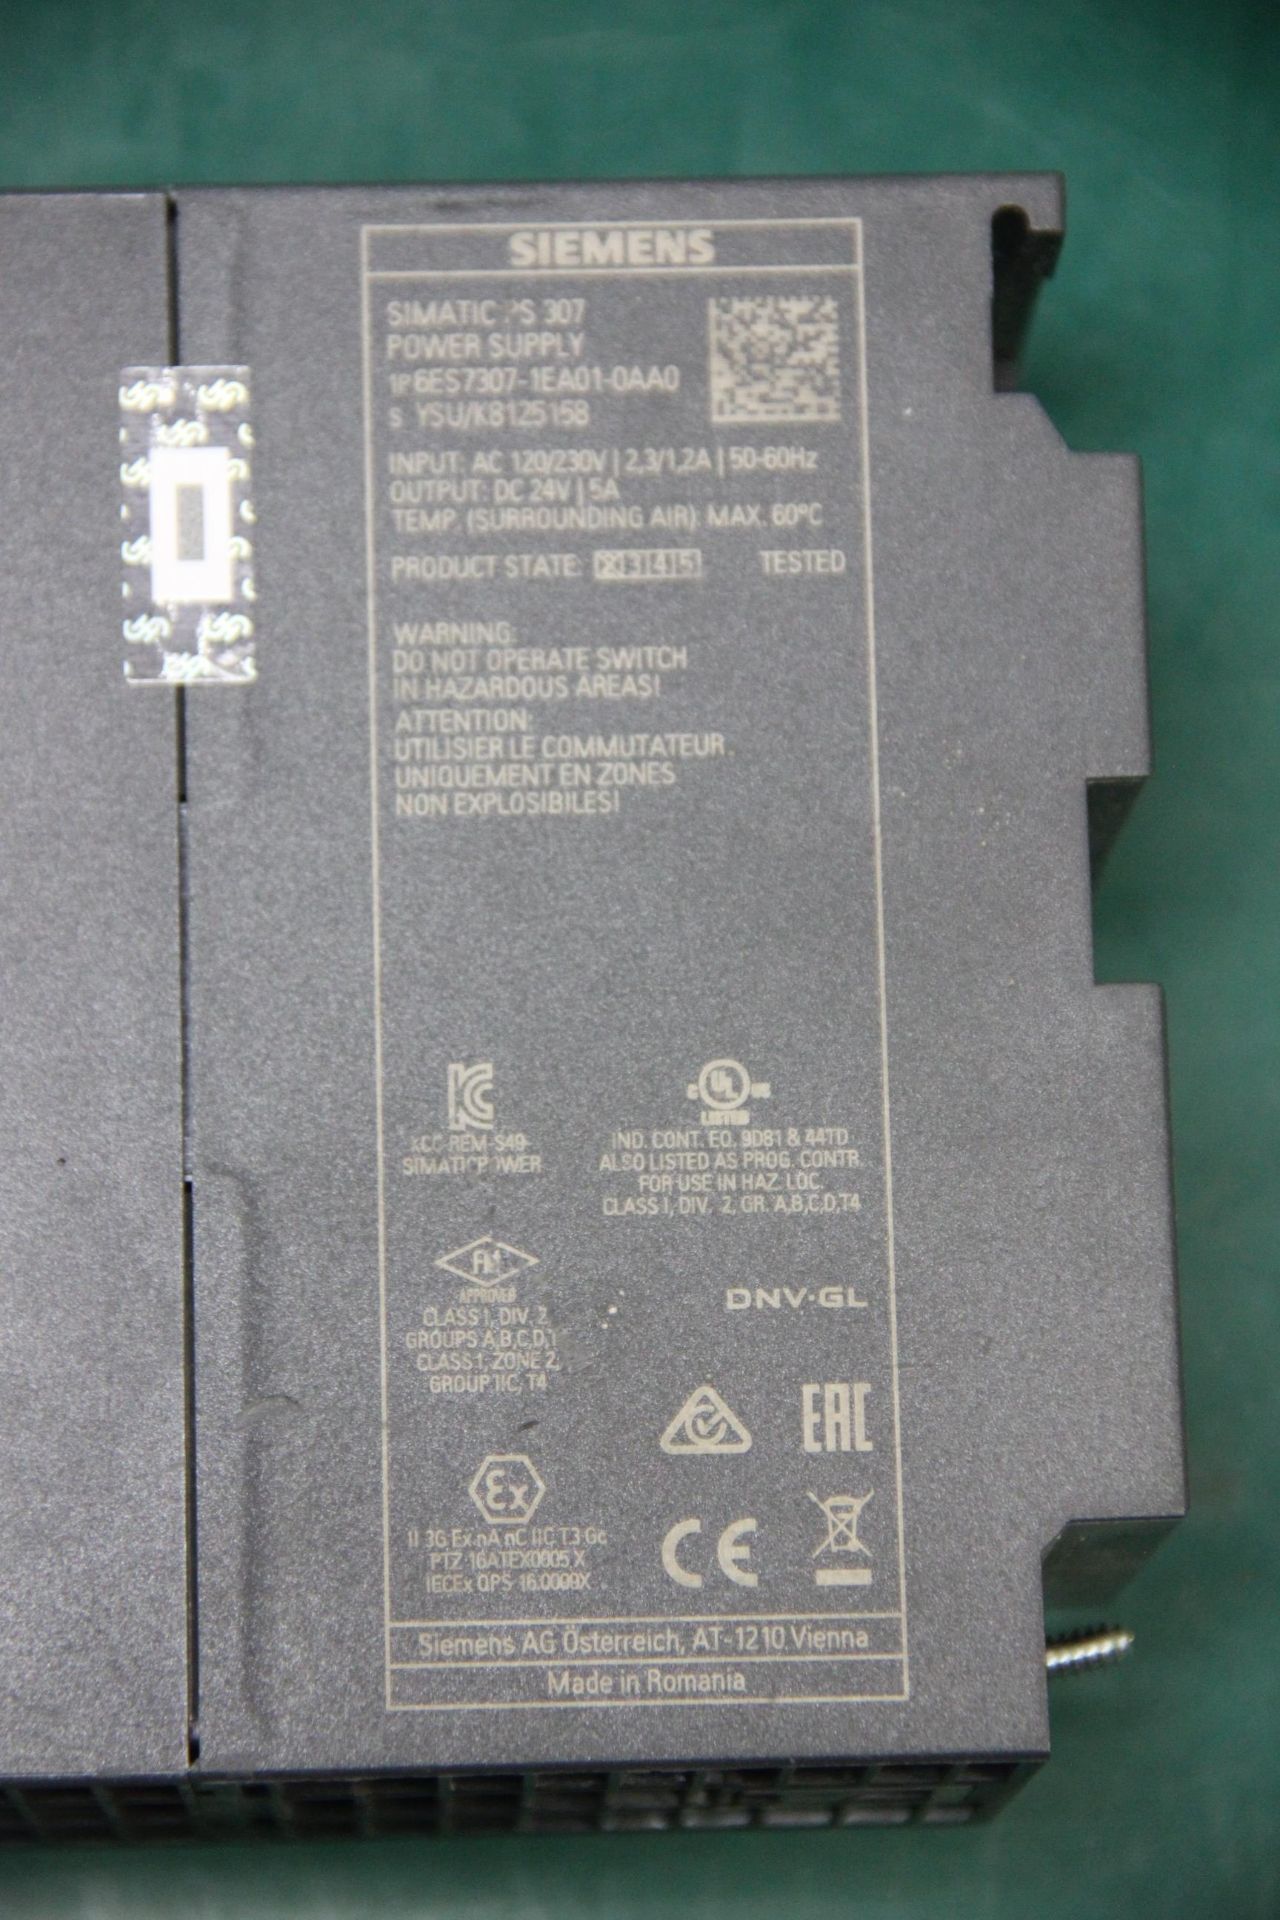 SIEMENS SIMATIC PS 307 POWER SUPPLY - Image 2 of 3